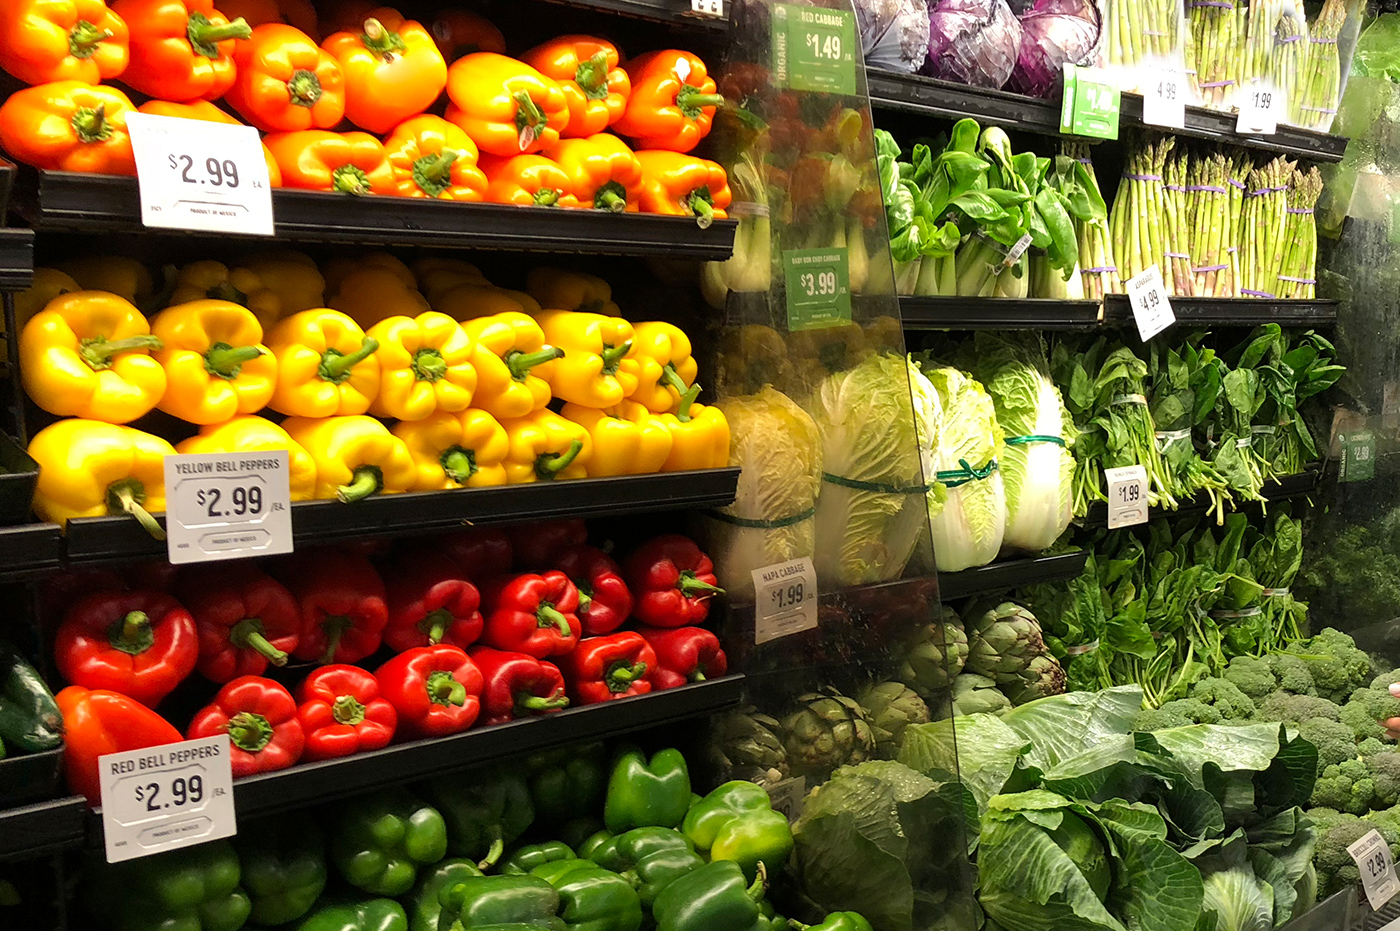 Store produce shelves with peppers and leafy green vegetables.